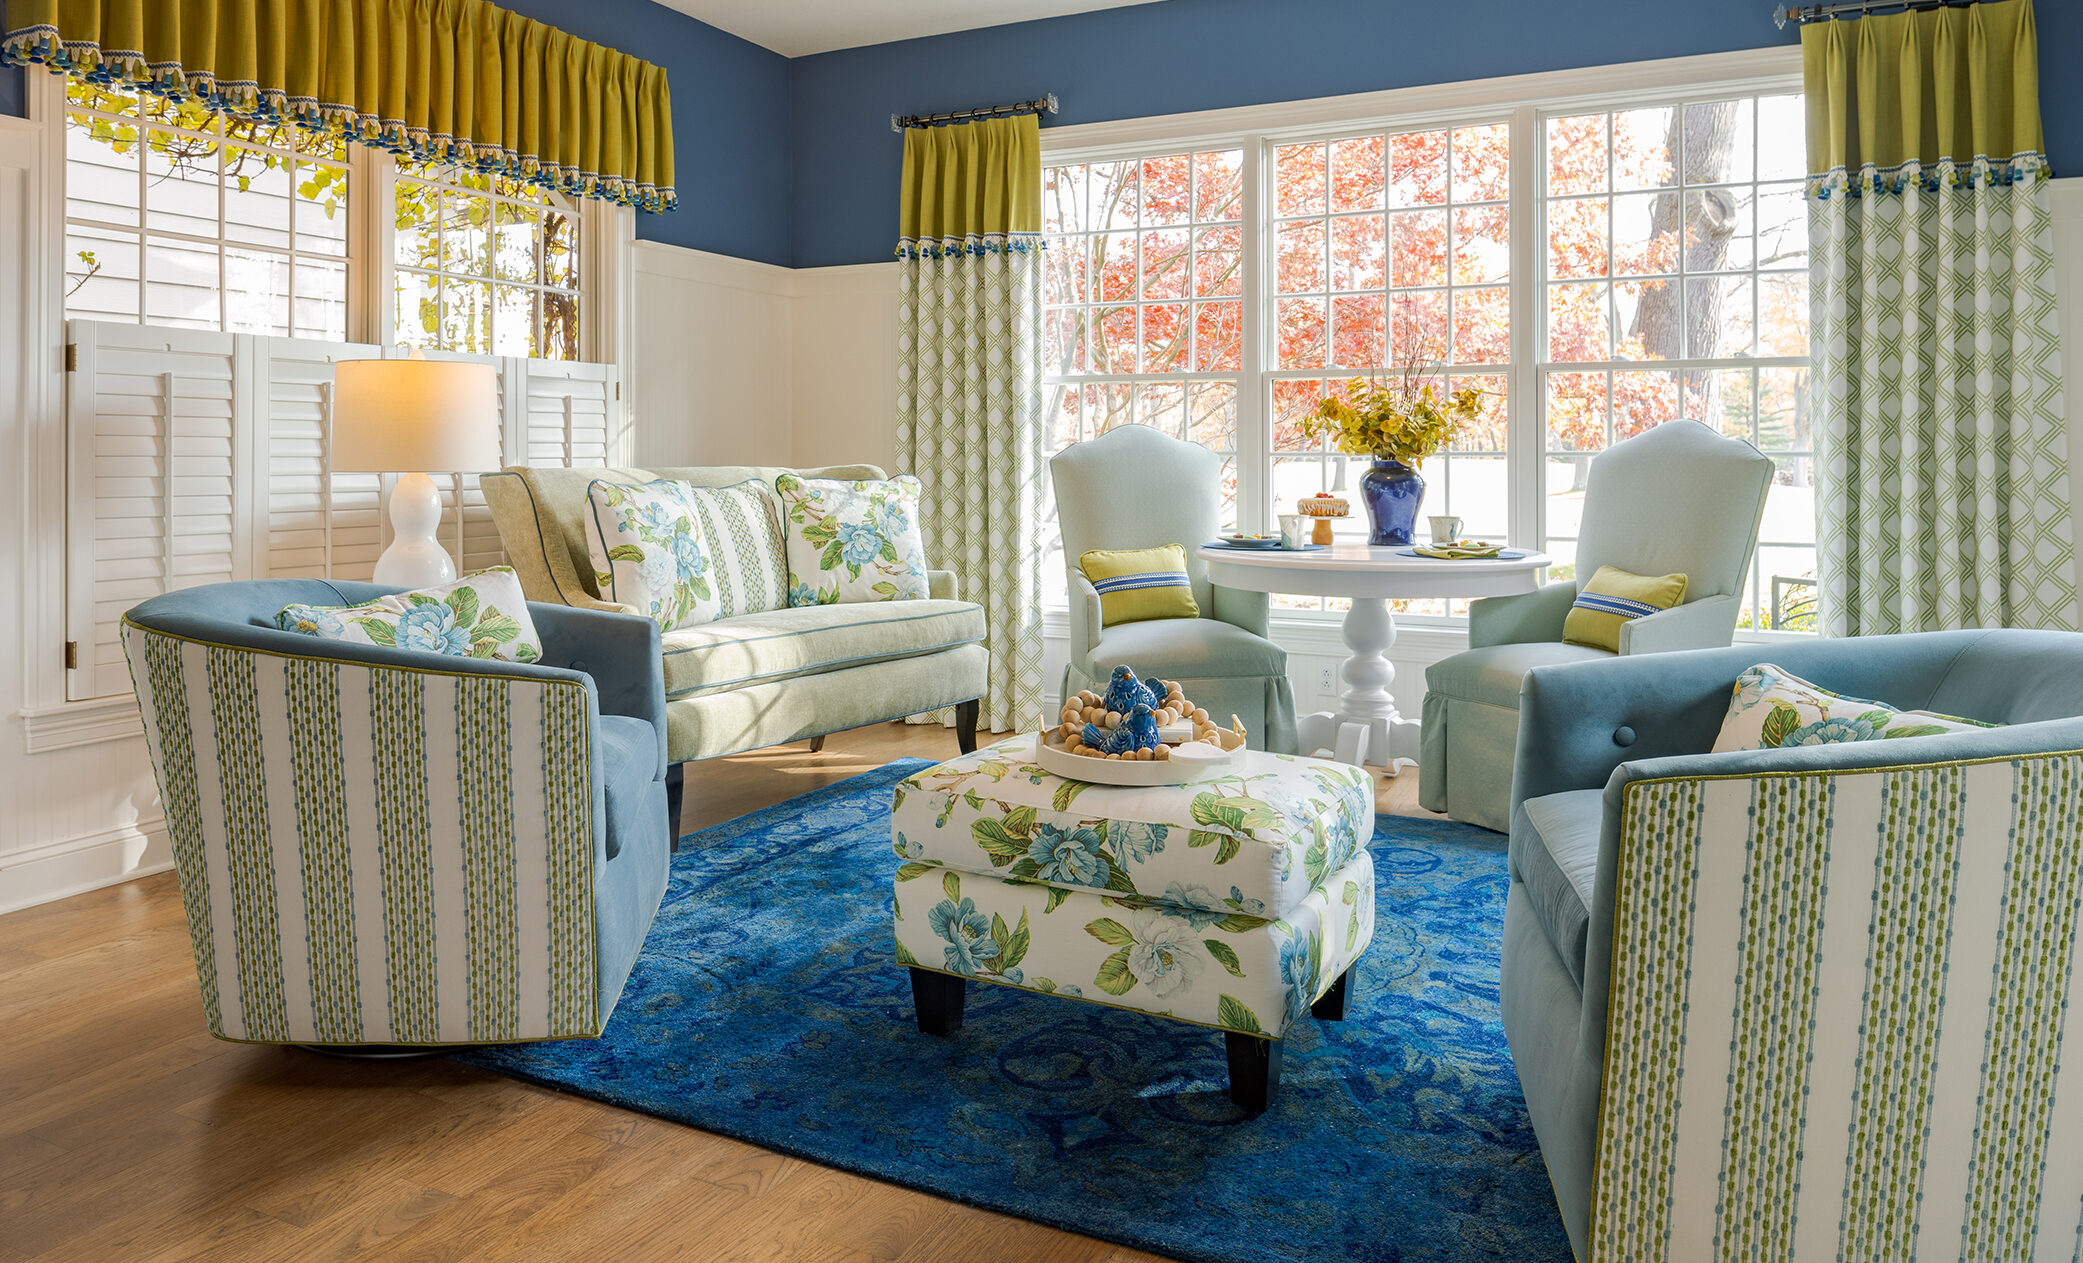 Give Your Sunroom a Facelift With These Bright Ideas